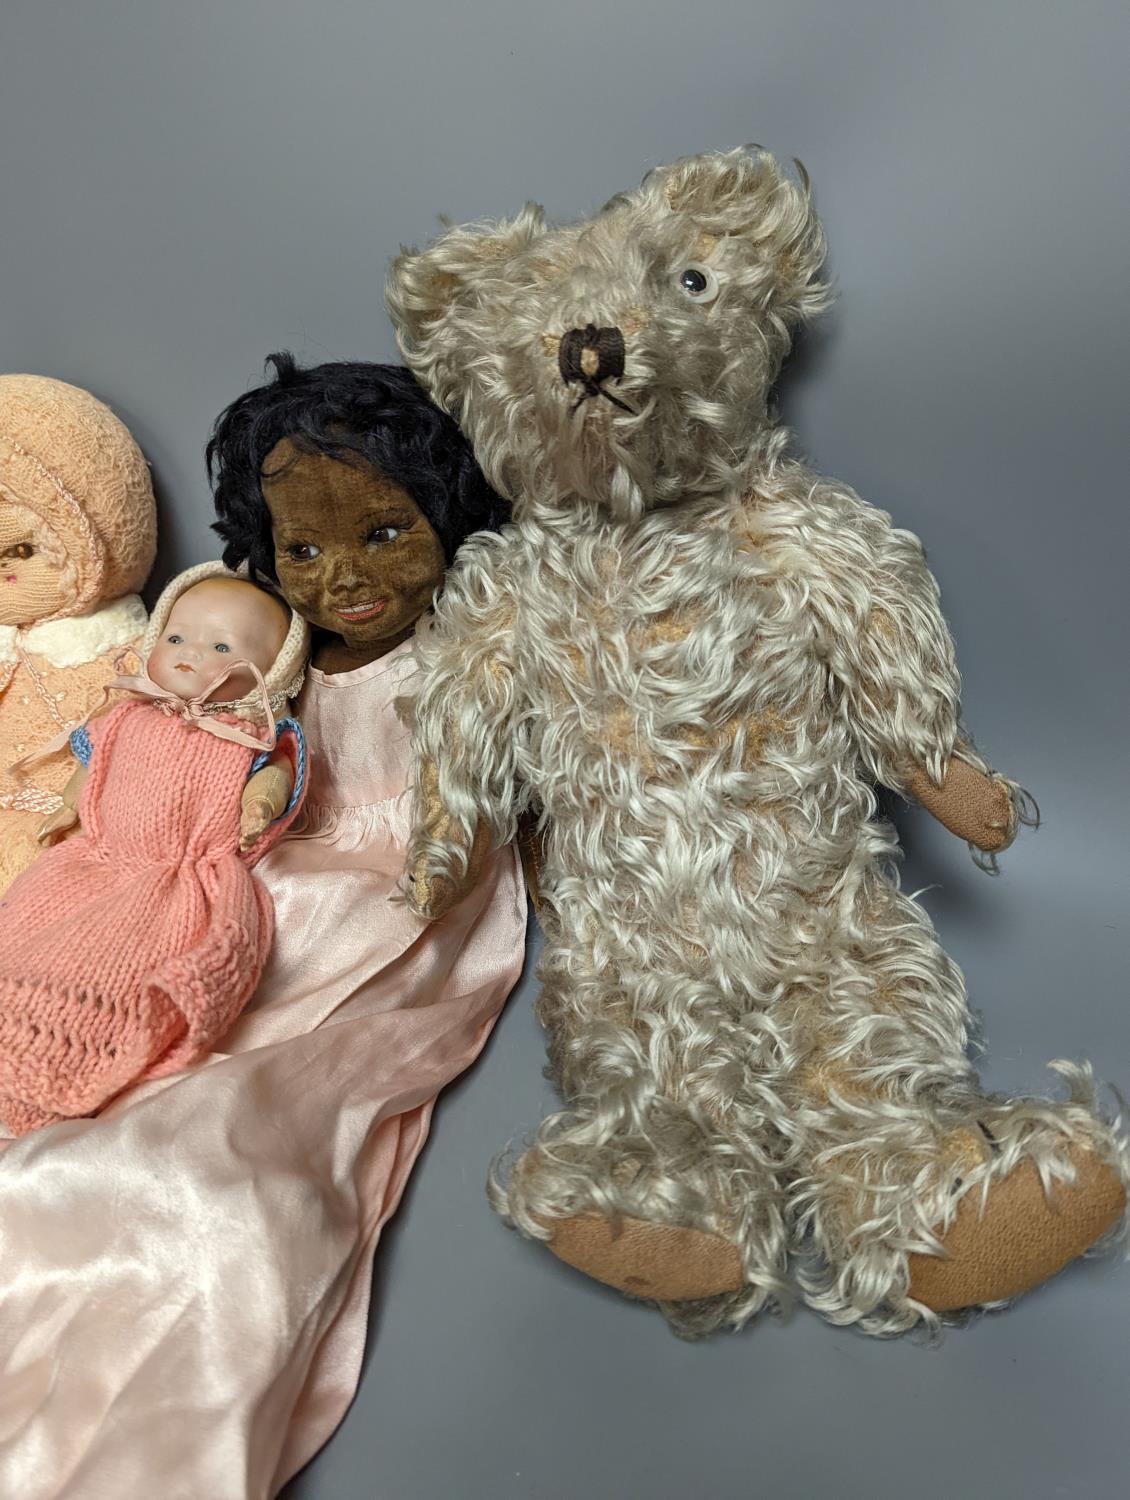 A Nora Wellings type mulatto doll and an Armmand Marseille doll 341, teddy etc, mulatto doll 43cms - Image 5 of 5